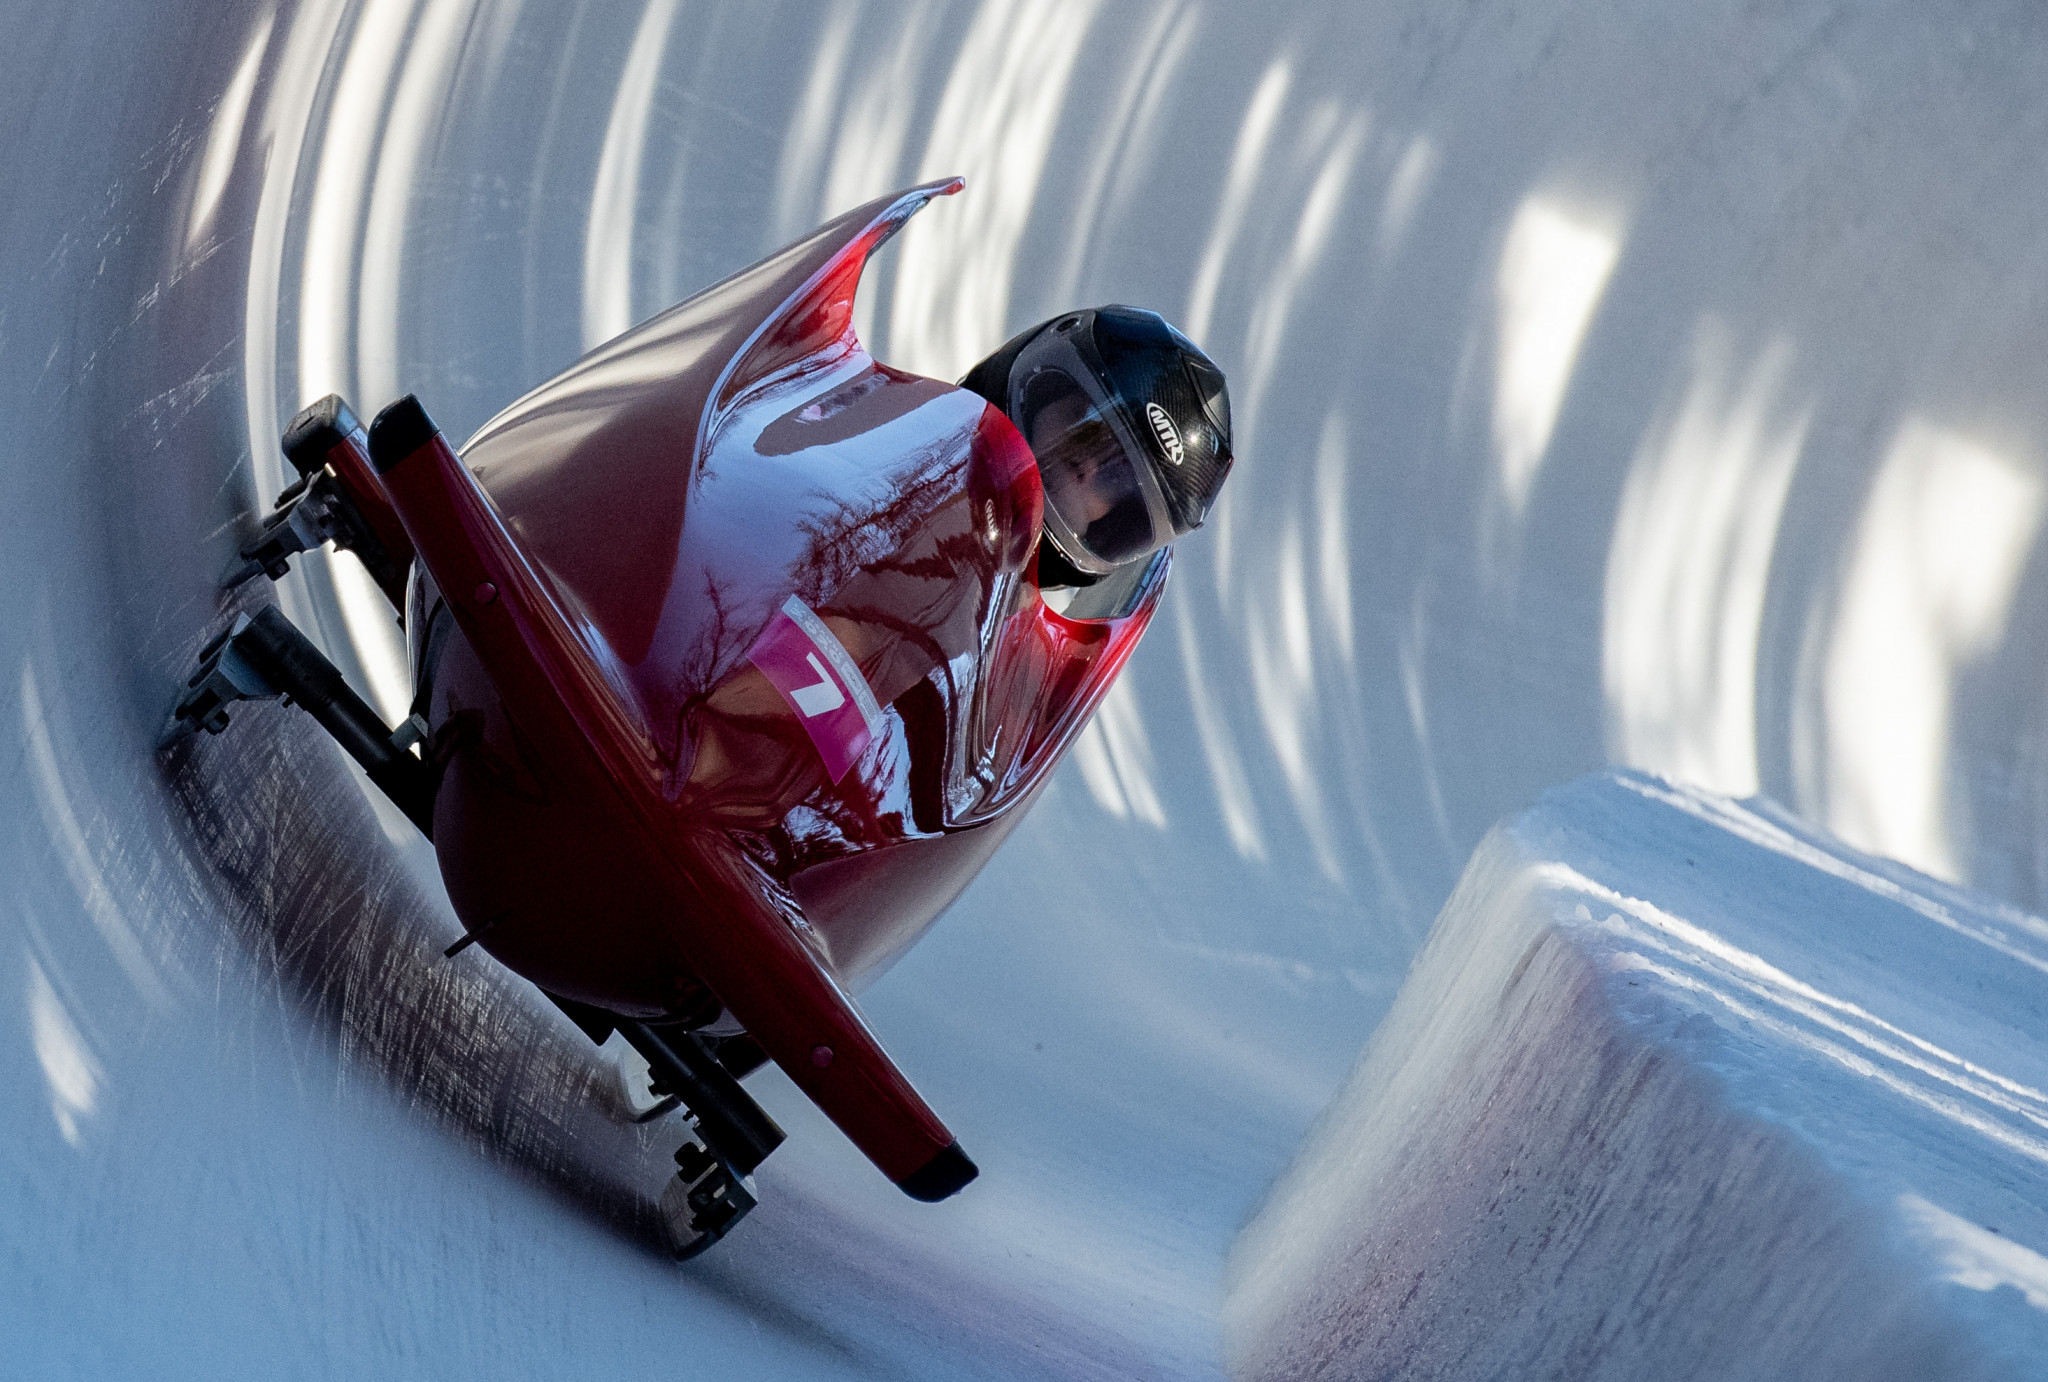 Training runs for bobsleigh, luge and skeleton were held prior to competition beginning ©Lausanne 2020